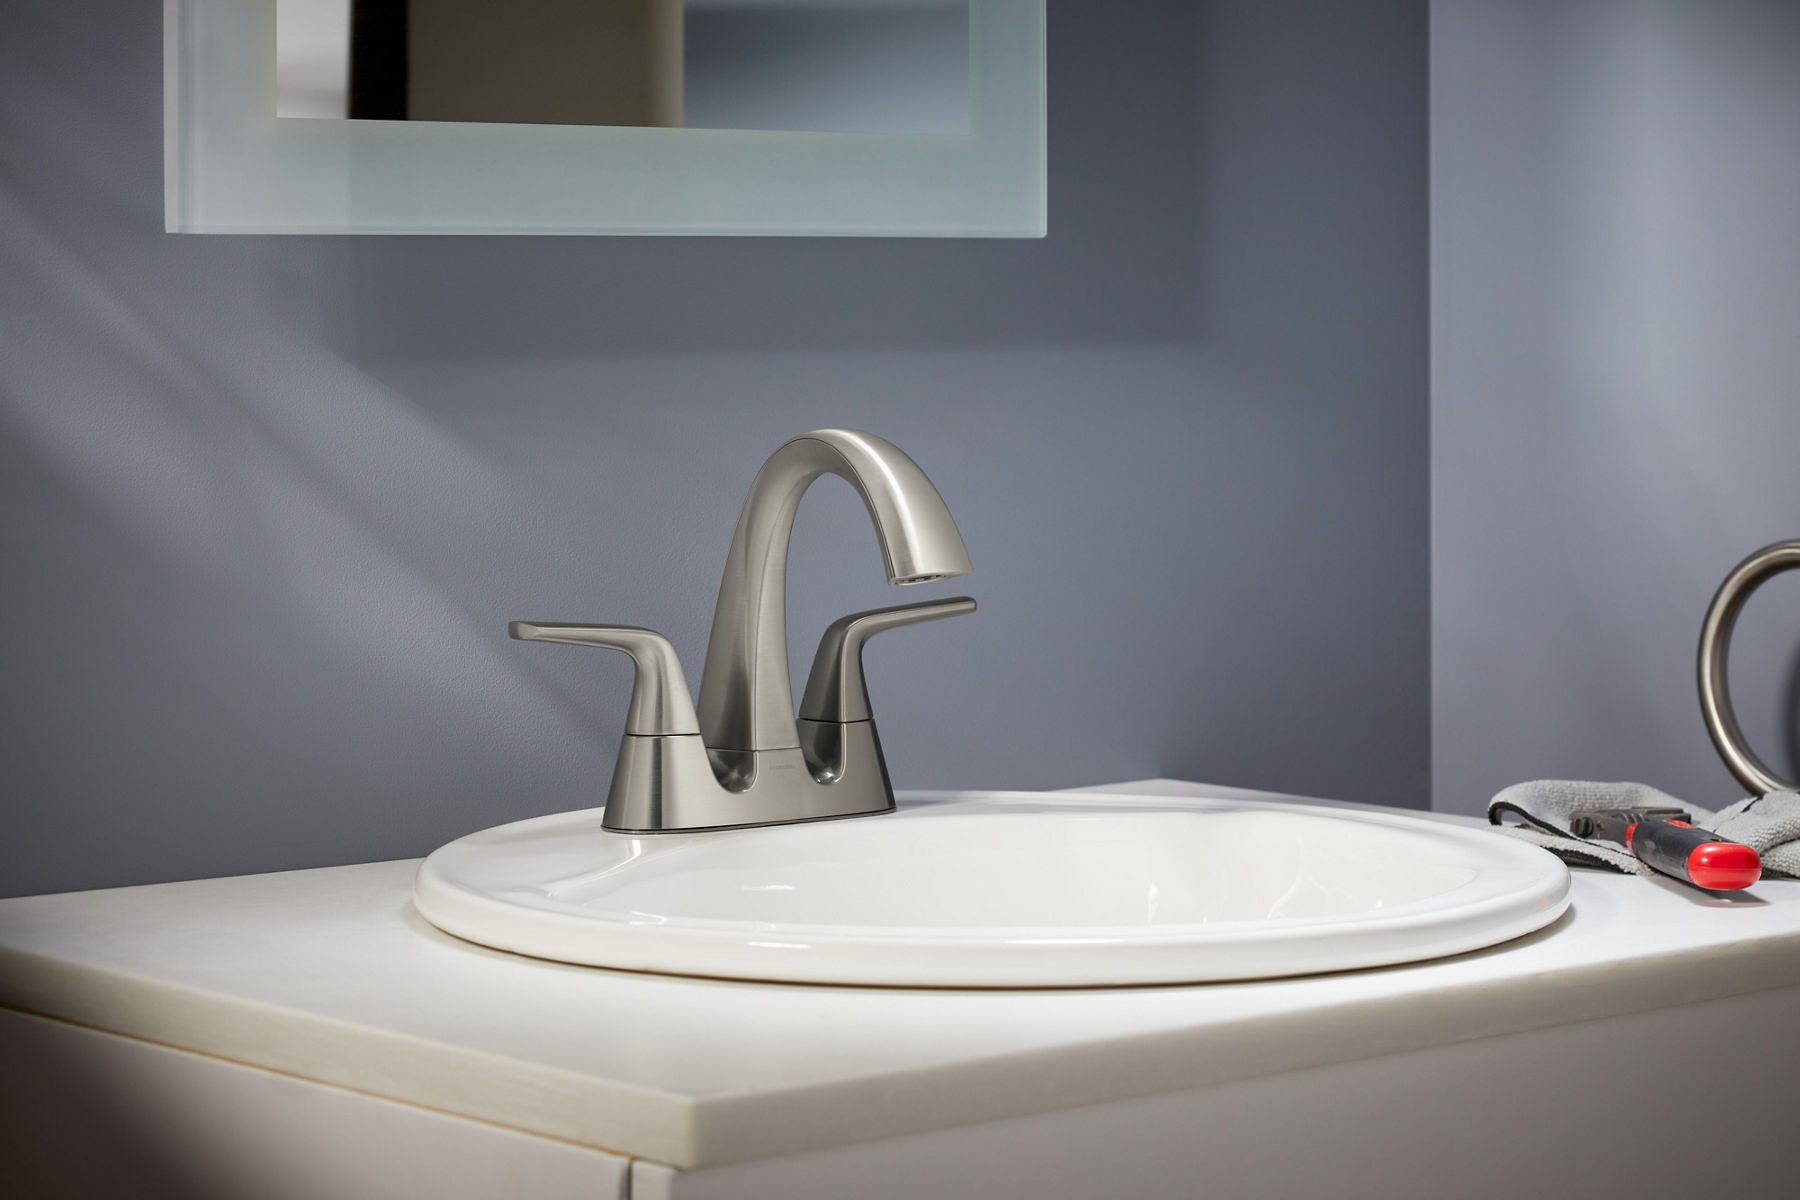 Centerset sink with long, graceful handles and spout in brushed nickel, on a white sink with gray walls in background.